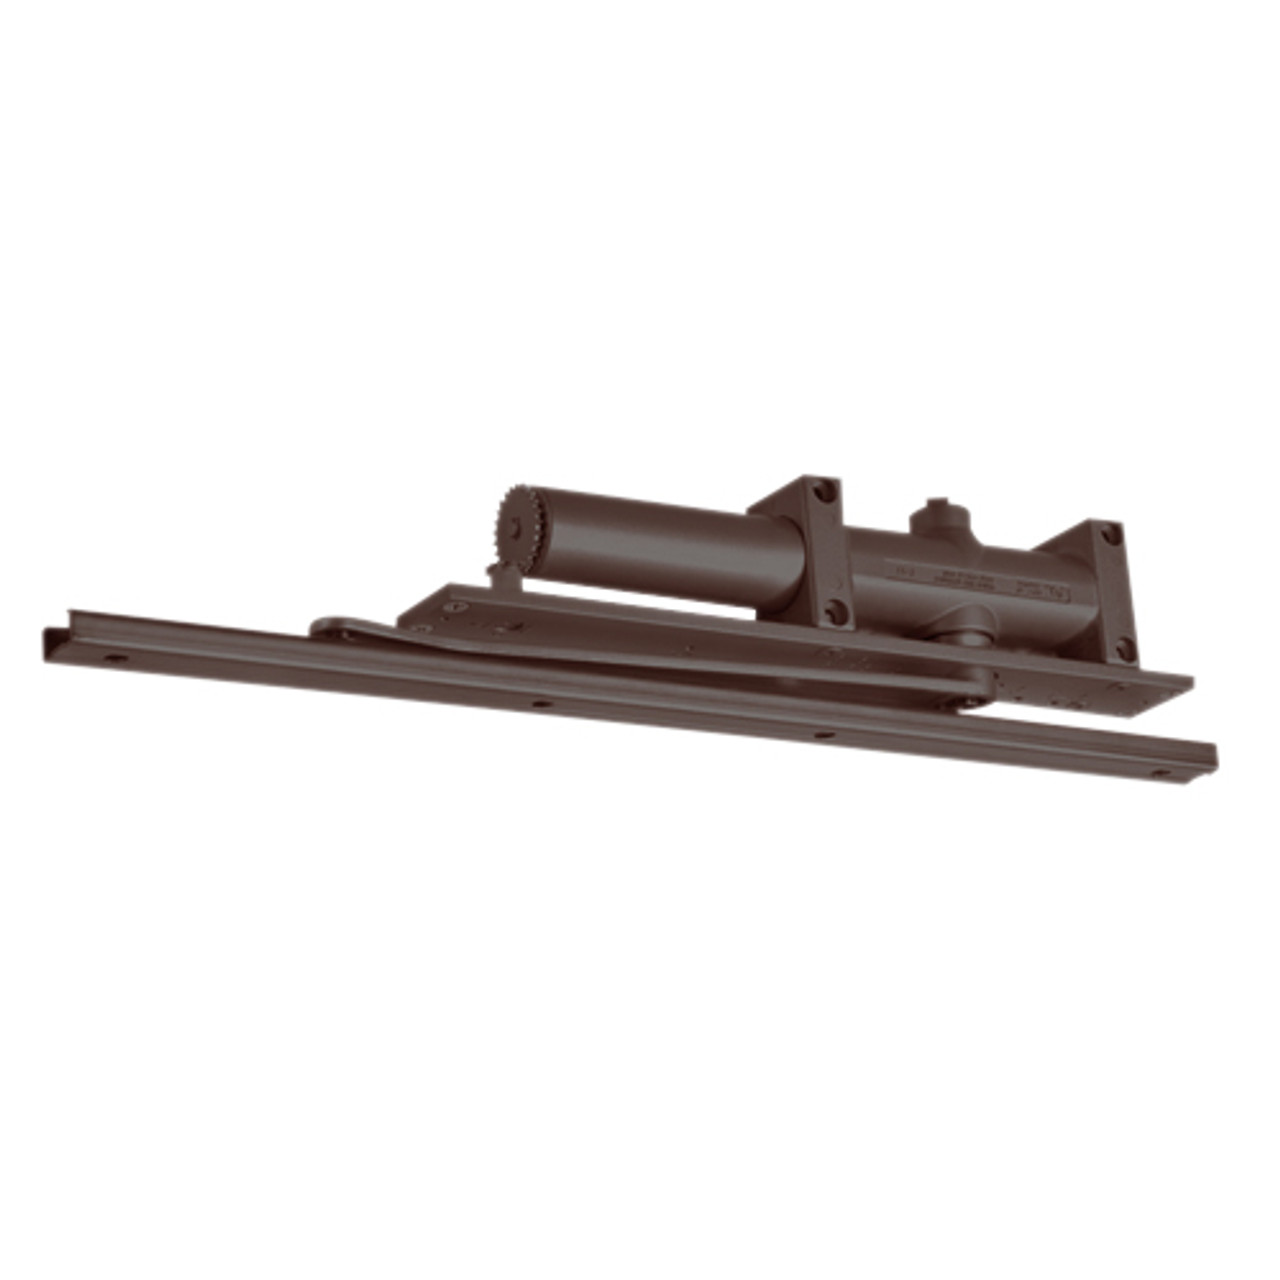 7970-690-RH Norton 7900 Series Non-Hold Open Overhead Concealed Security Closers with Multi-Sized Spring 1-6 in Statuary Bronze Finish